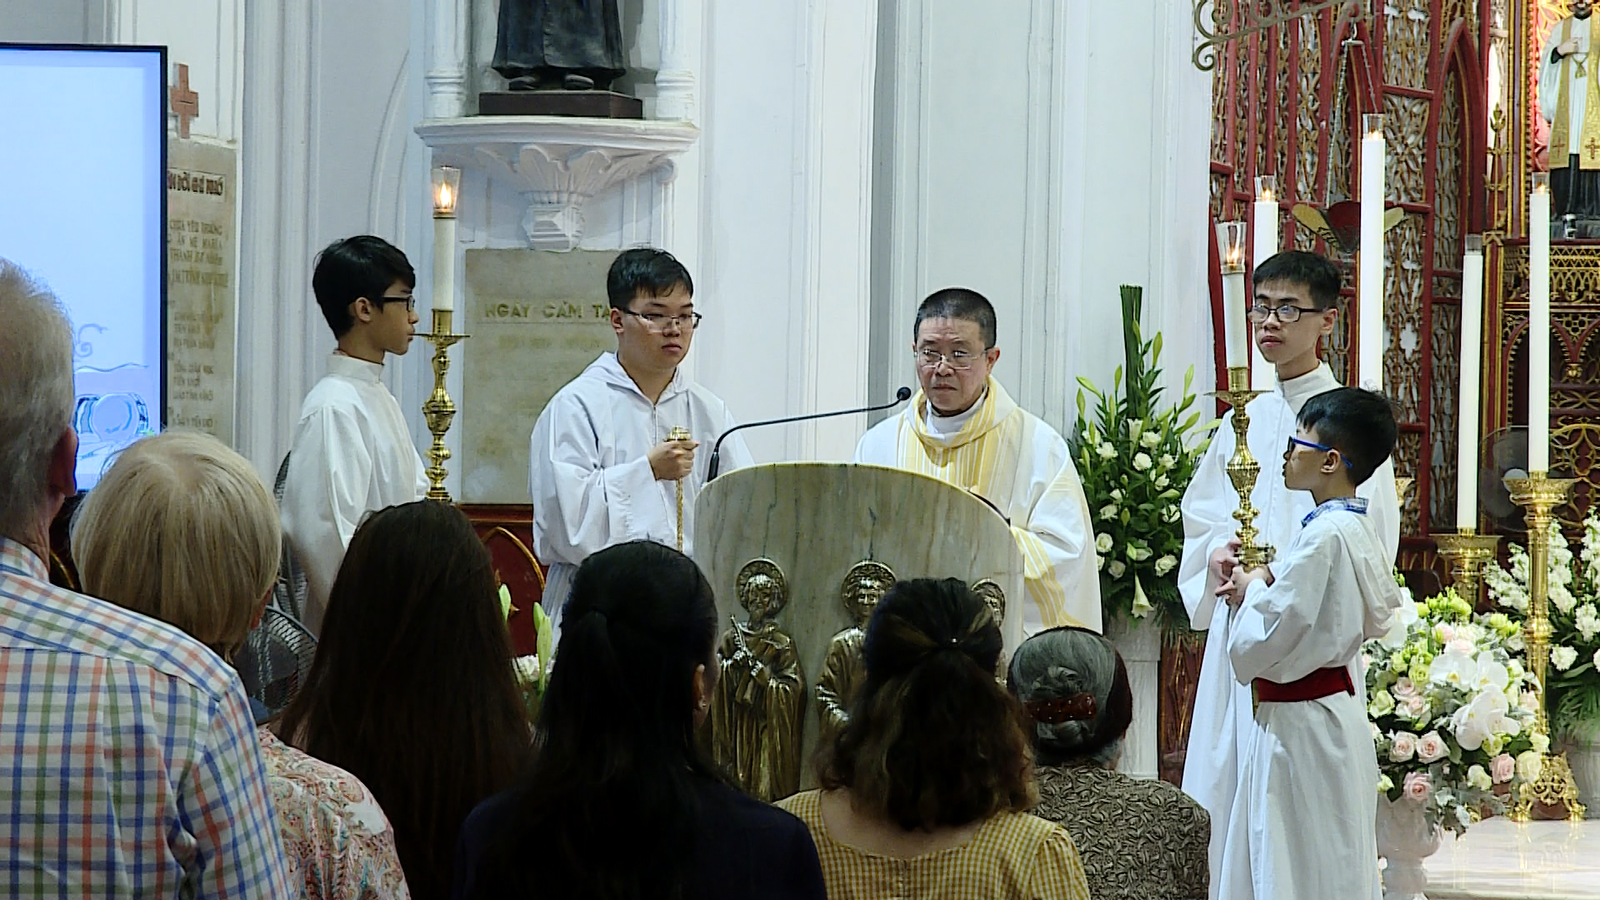 Thousands of priests have been sent to the Vatican to study and returned home to serve the demand for religious practice among Vietnamese practitioners as well as foreigners living and working in Vietnam (Photo: VNA)